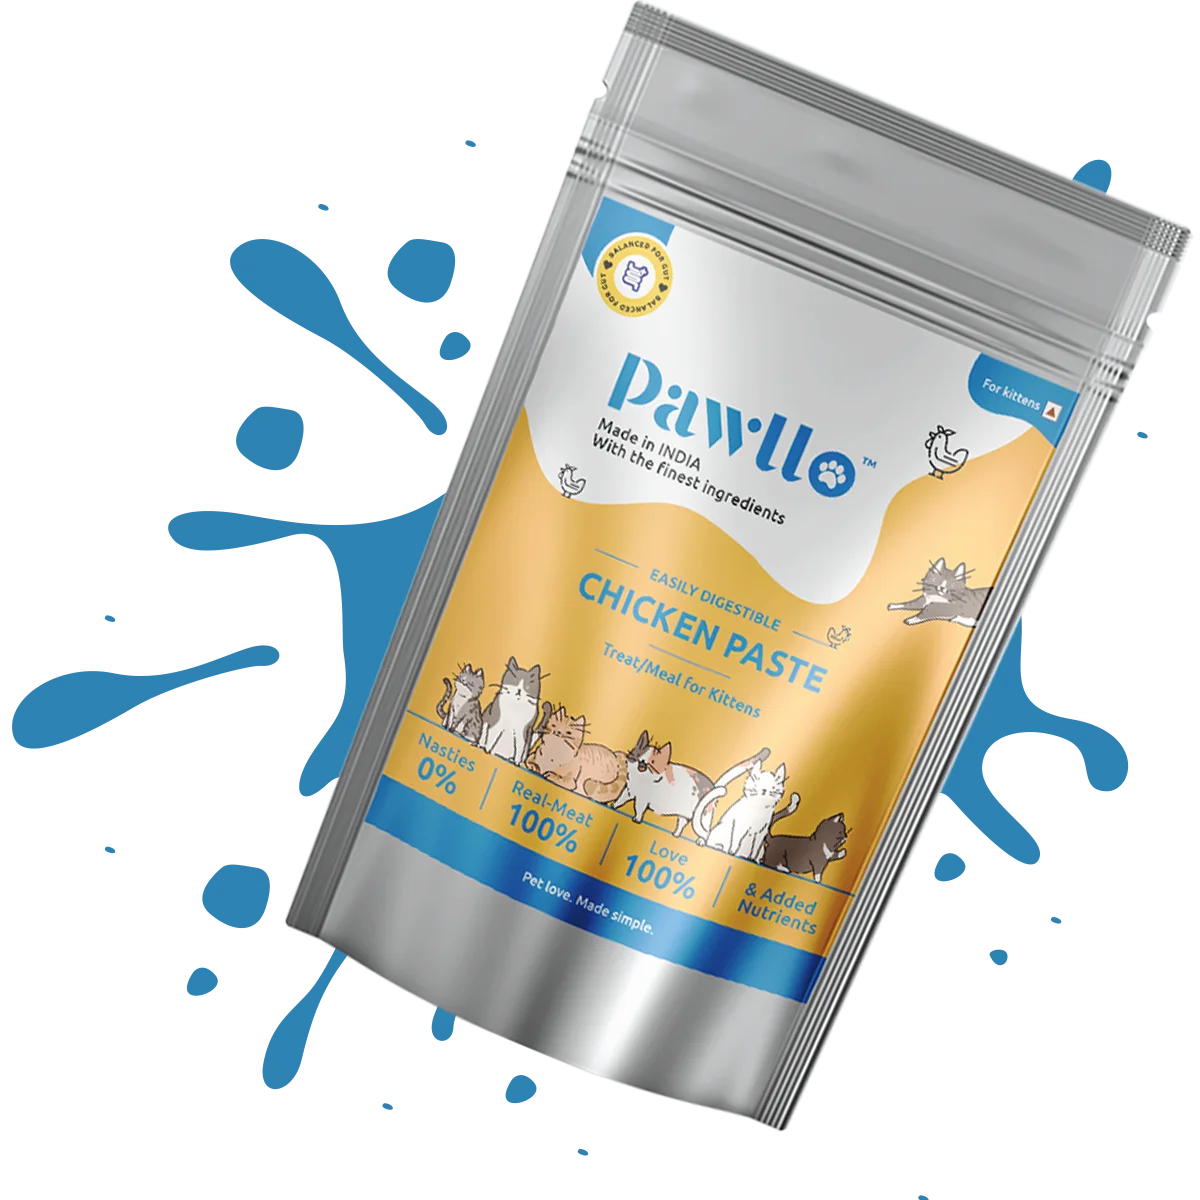 Chicken Paste (Kittens) - Omega-3 Enriched, Protein-Packed Treat/Meal with Premium Chicken Goodness